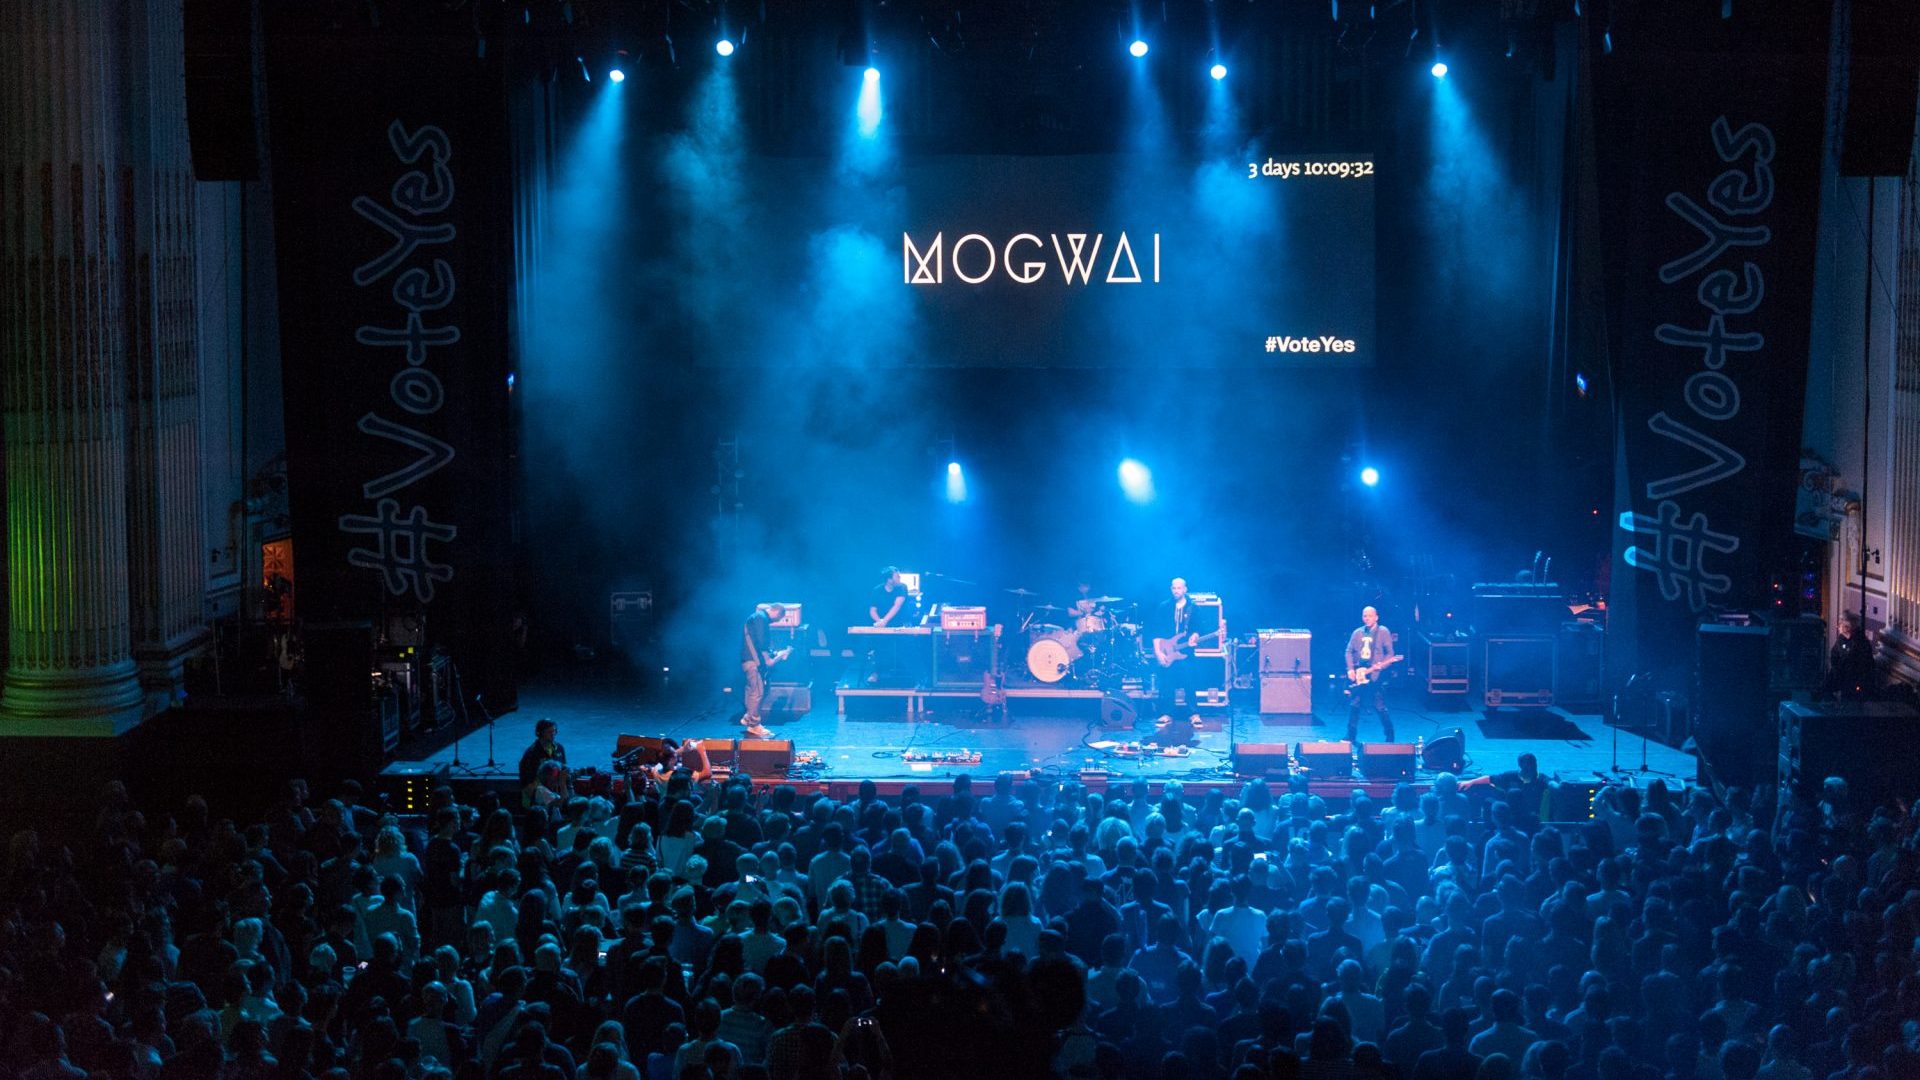 Mogwai play 'A Night for Scotland' in support of independence in 2014 in Edinburgh (Photo by Roberto Ricciuti/Redferns via Getty Images)